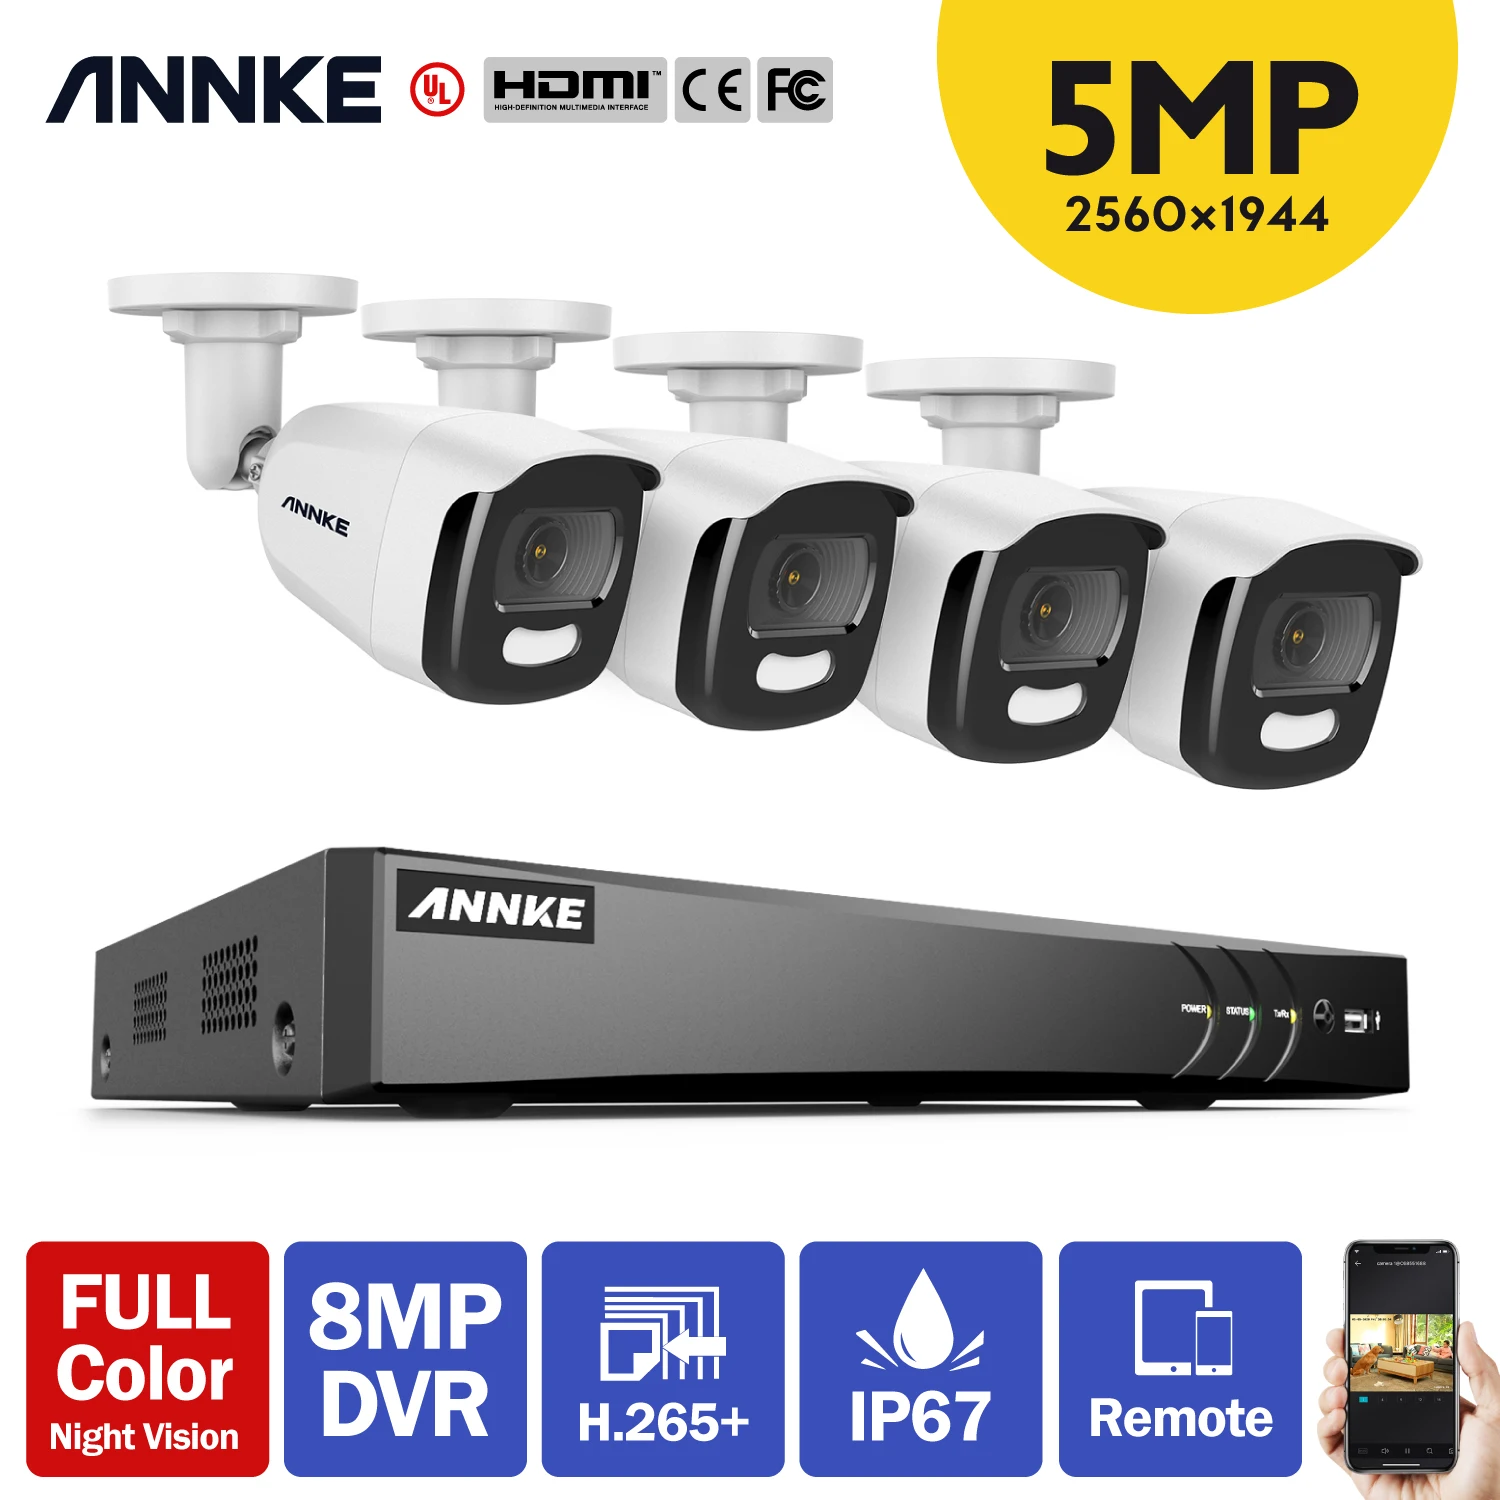 

ANNKE FHD 5MP Full Color Night Vision Video Surveillance System 8MP H.265+ DVR With 4PCS 5MP Outdoor Security Cameras CCTV Kit